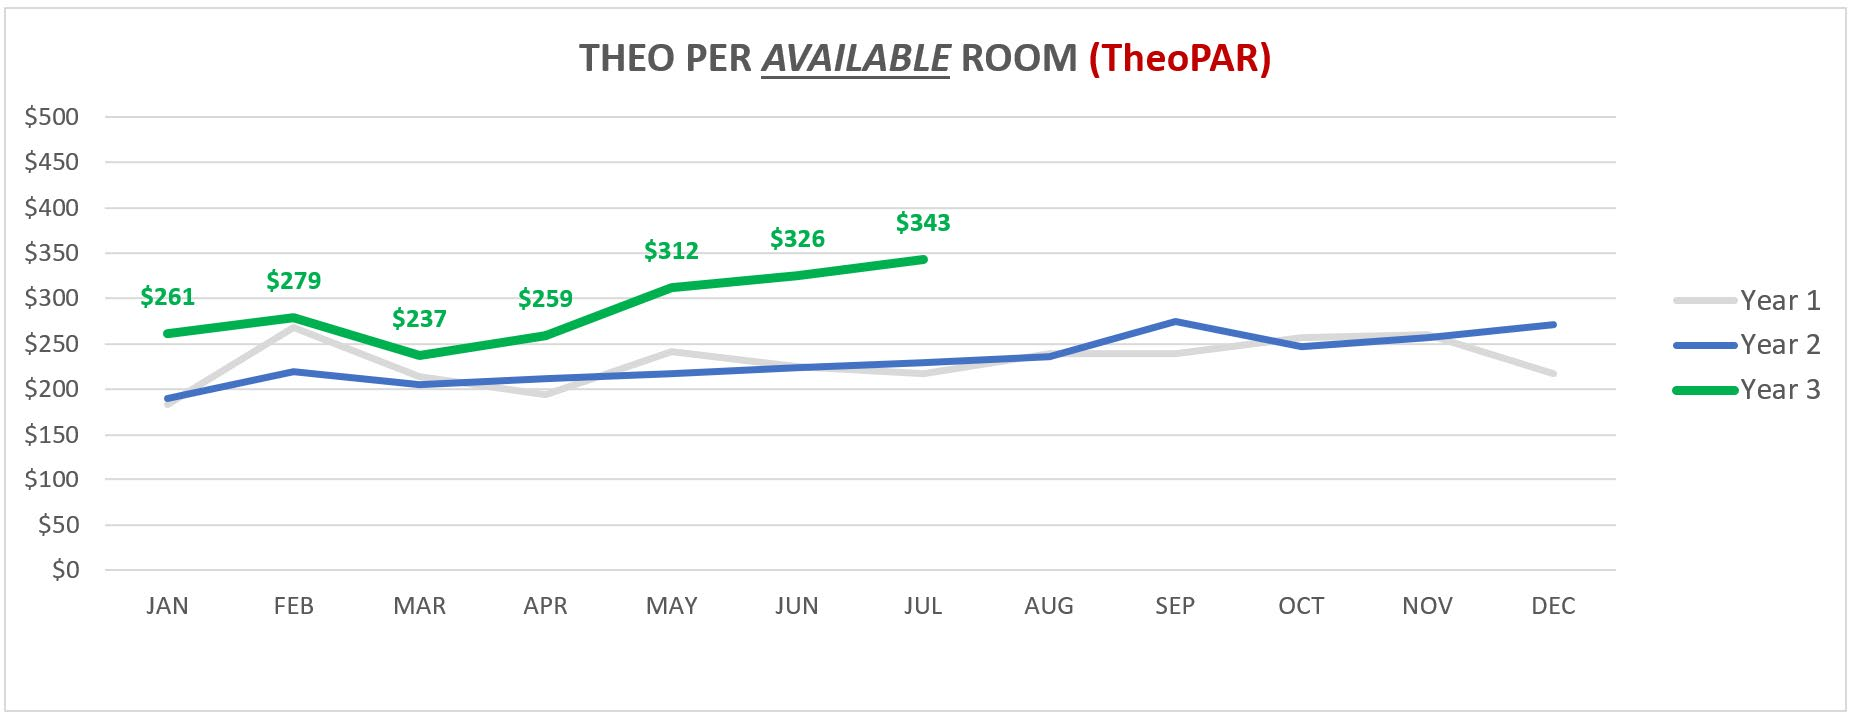 Theo per available room